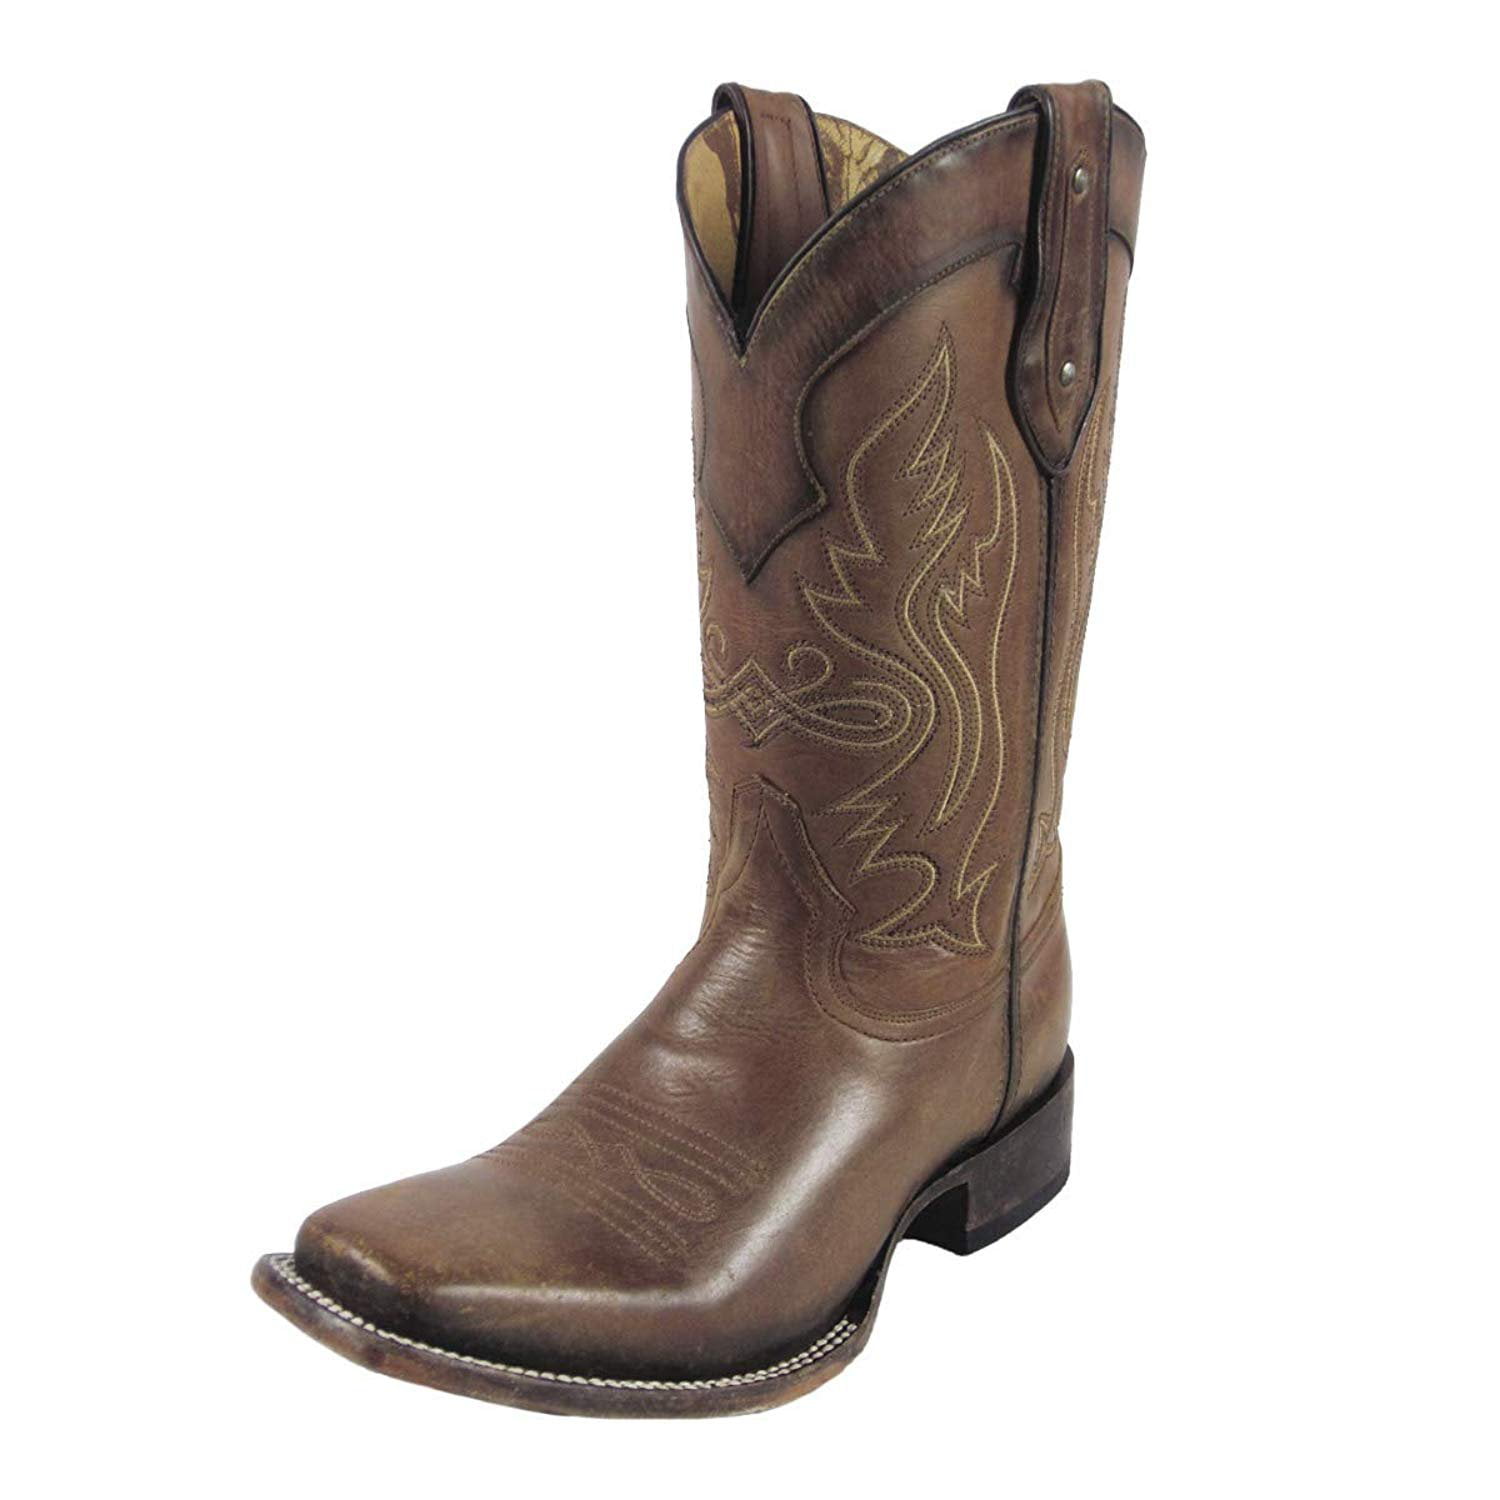 Corral Boots - CORRAL Men's Whiskey Embroidery Square Toe Boots (8.5 D ...